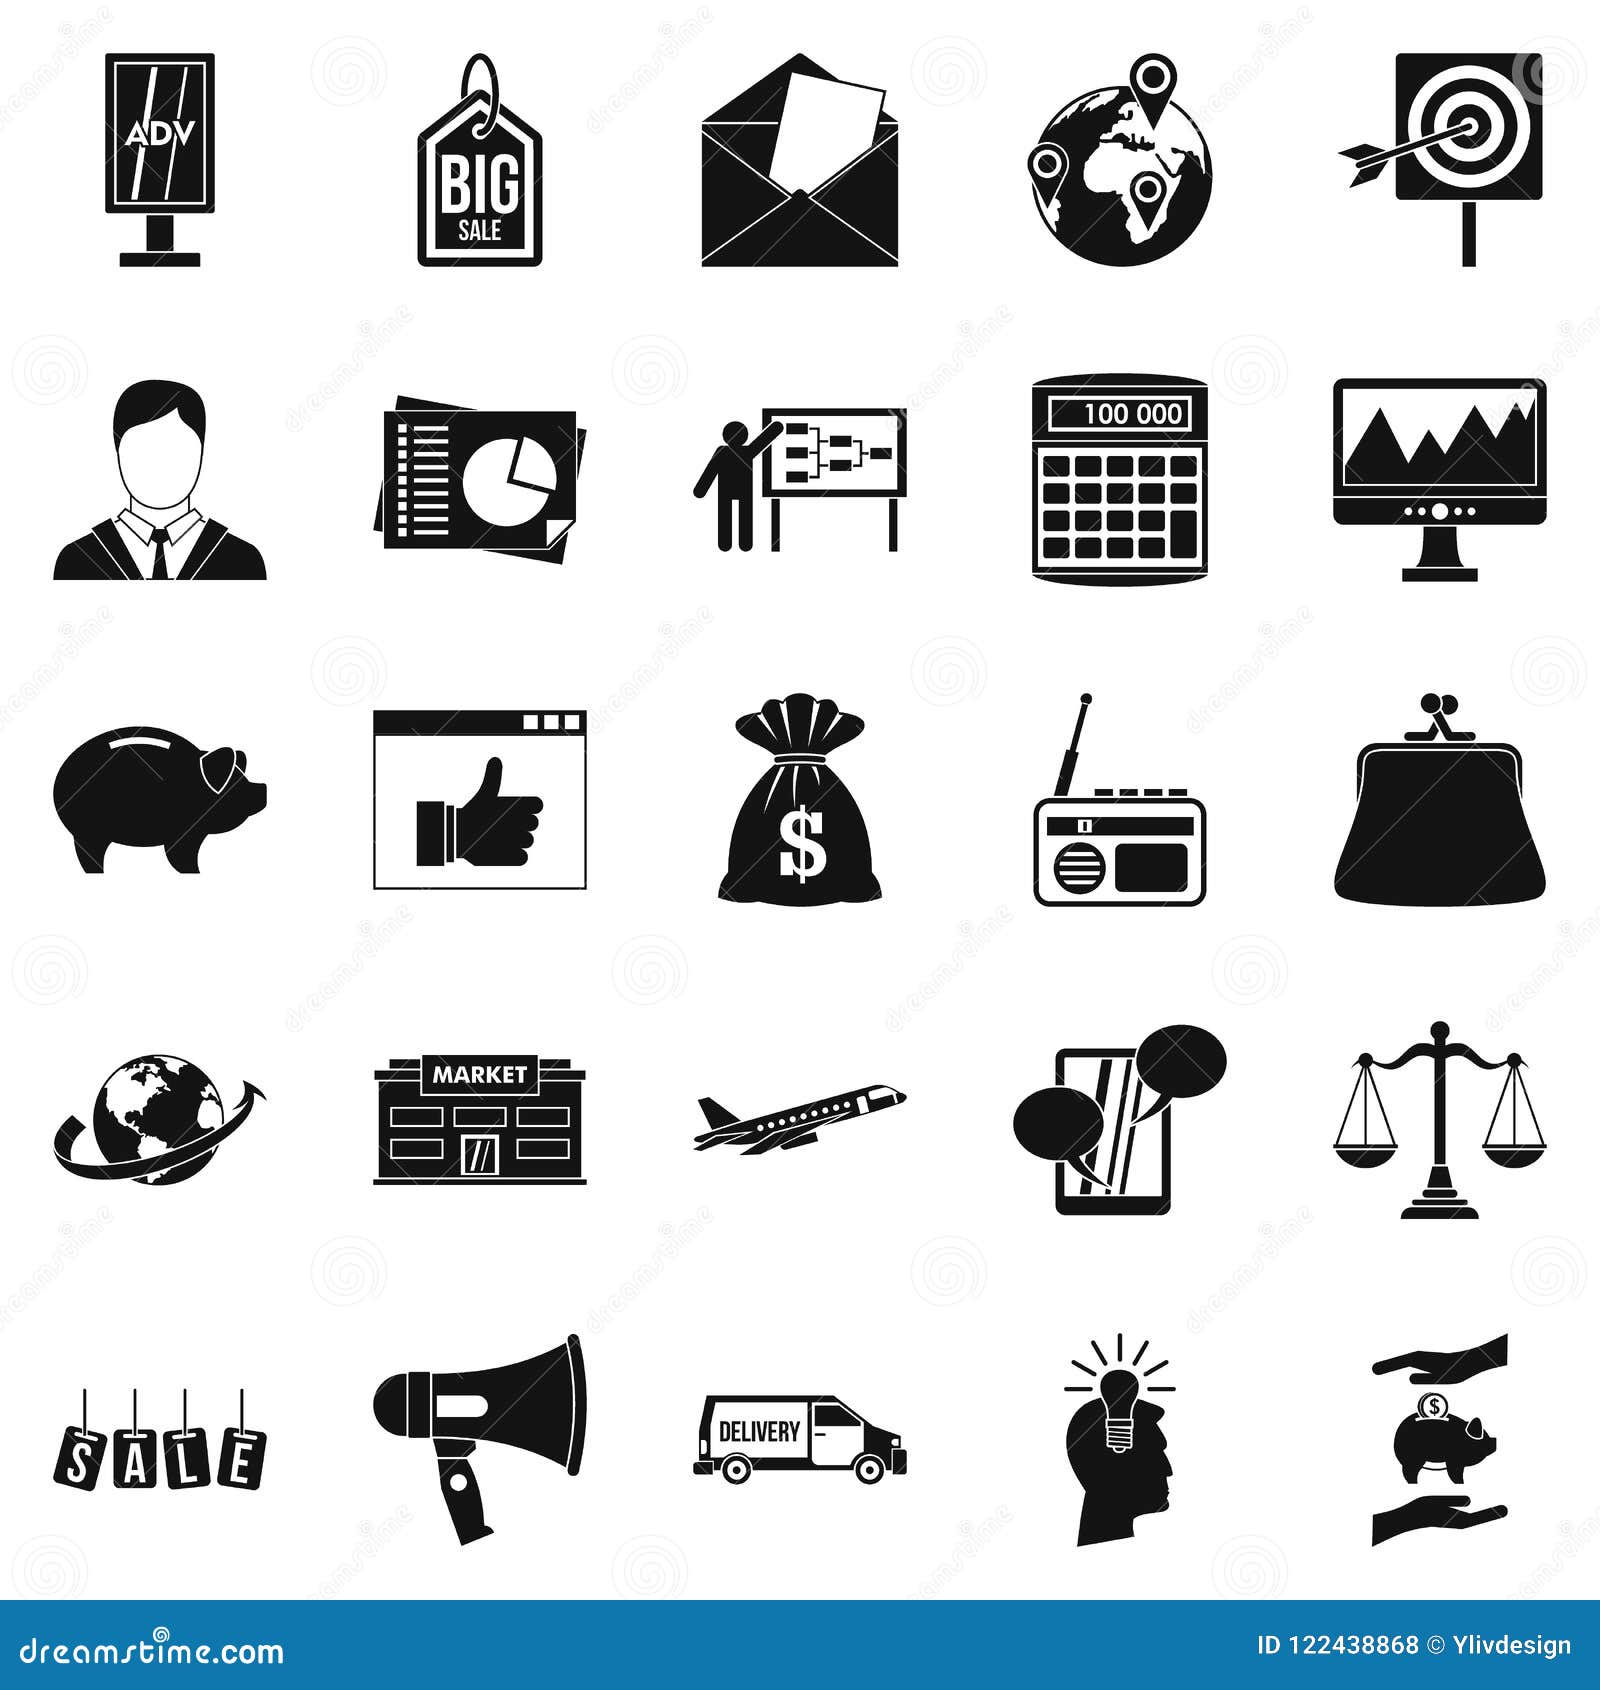 public domain icons for commercial use